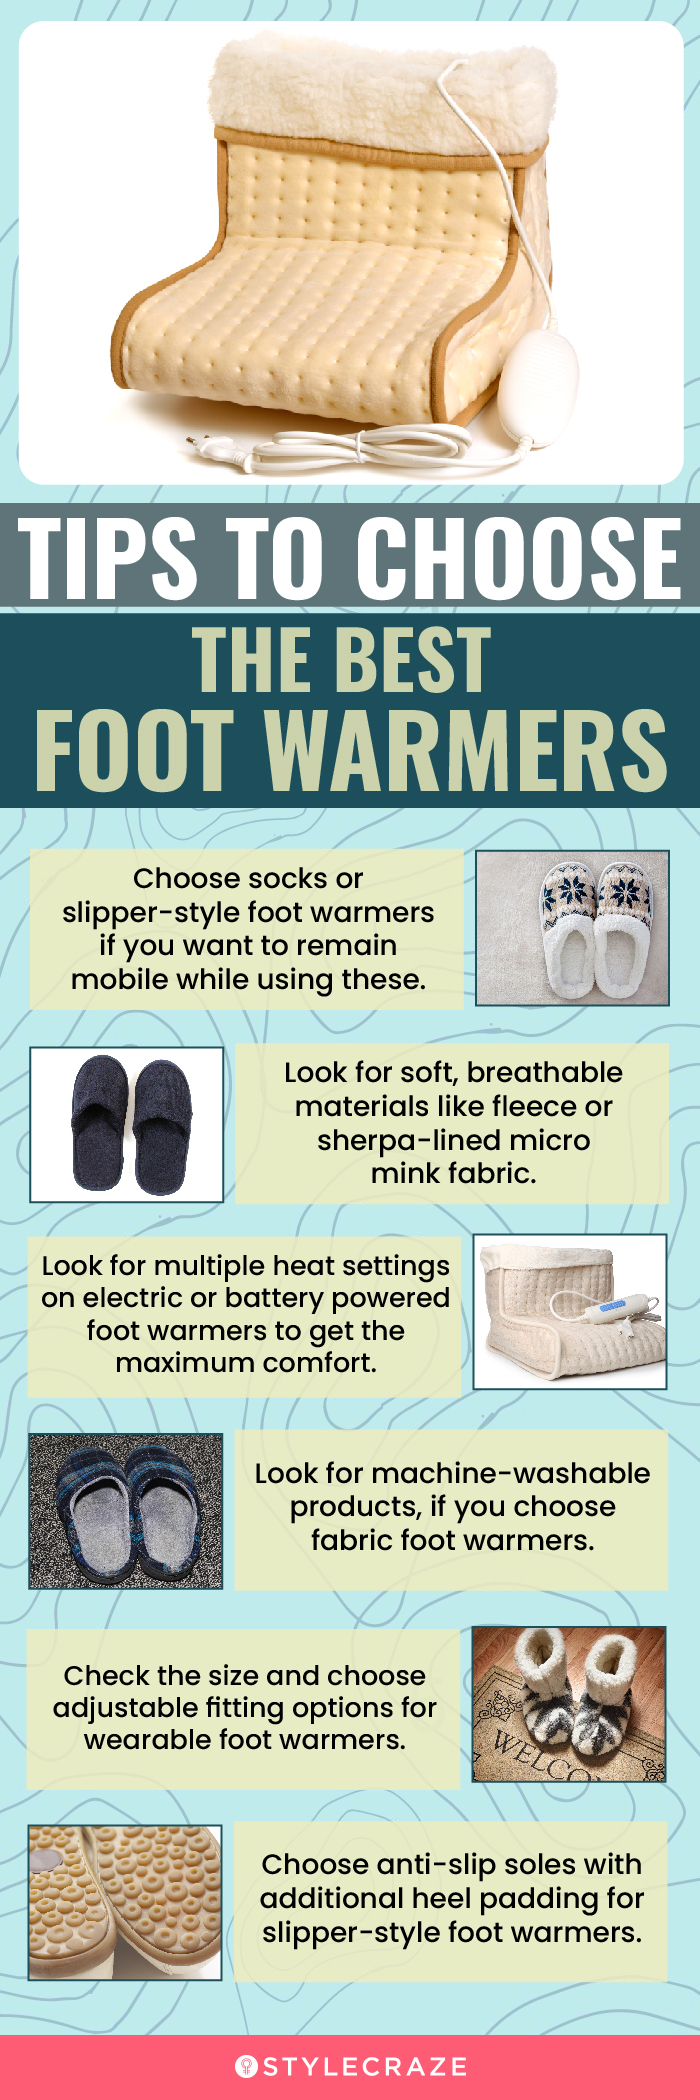 Tips To Choose The best Foot Warmers